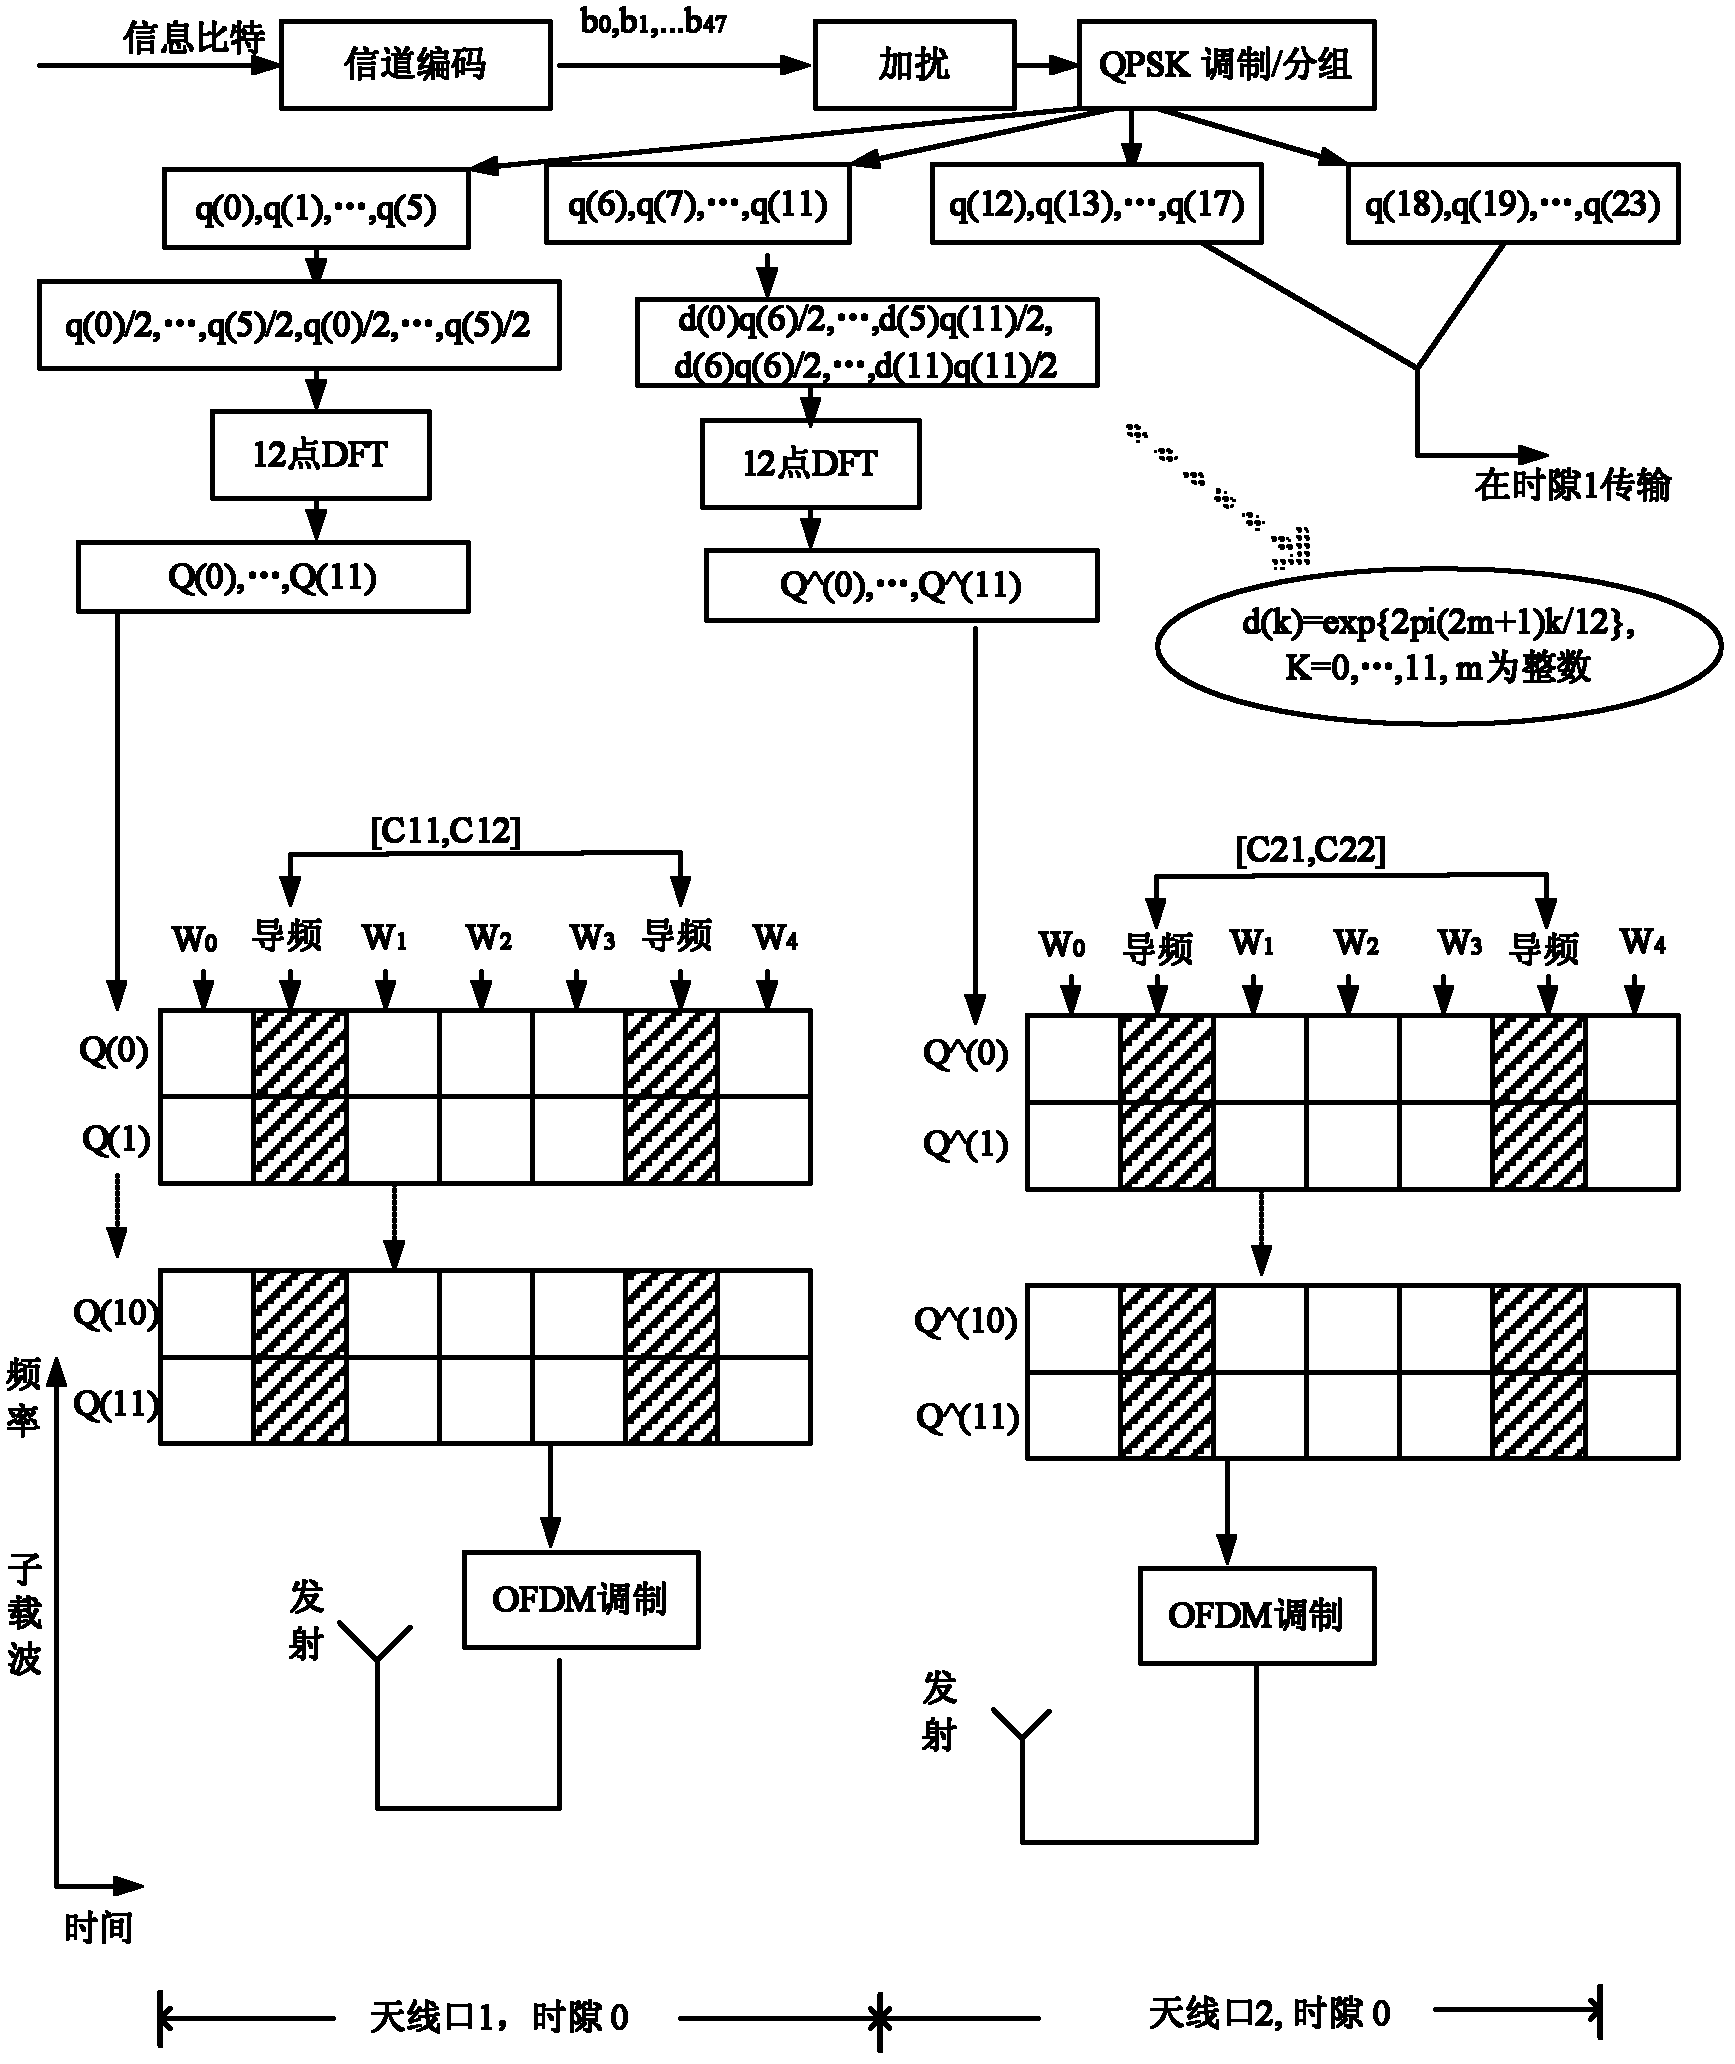 Method for transmitting, receiving and processing information, base station and user equipment